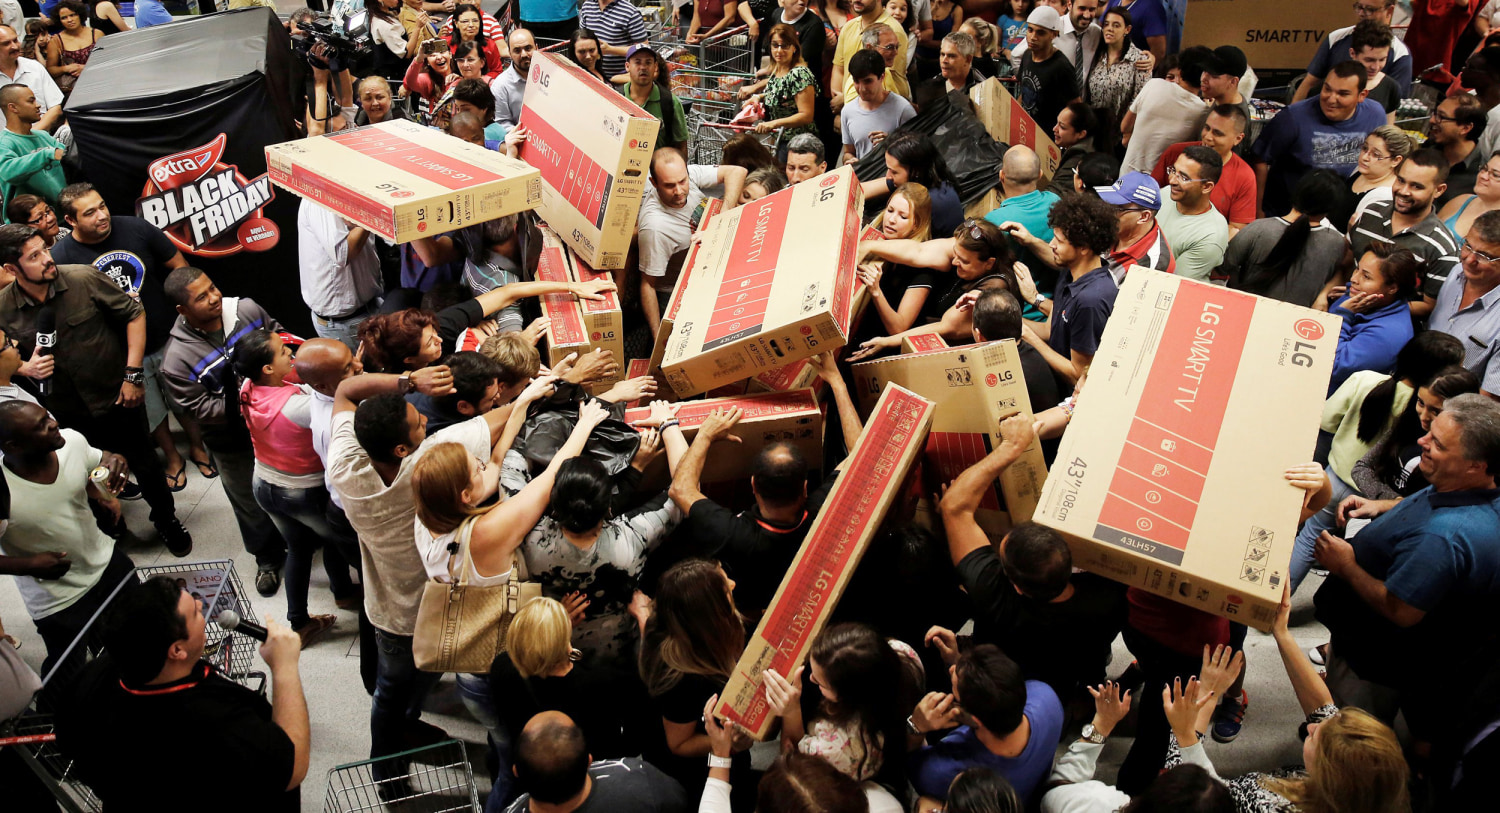 It's not Black Friday yet — but the price slashing has already started